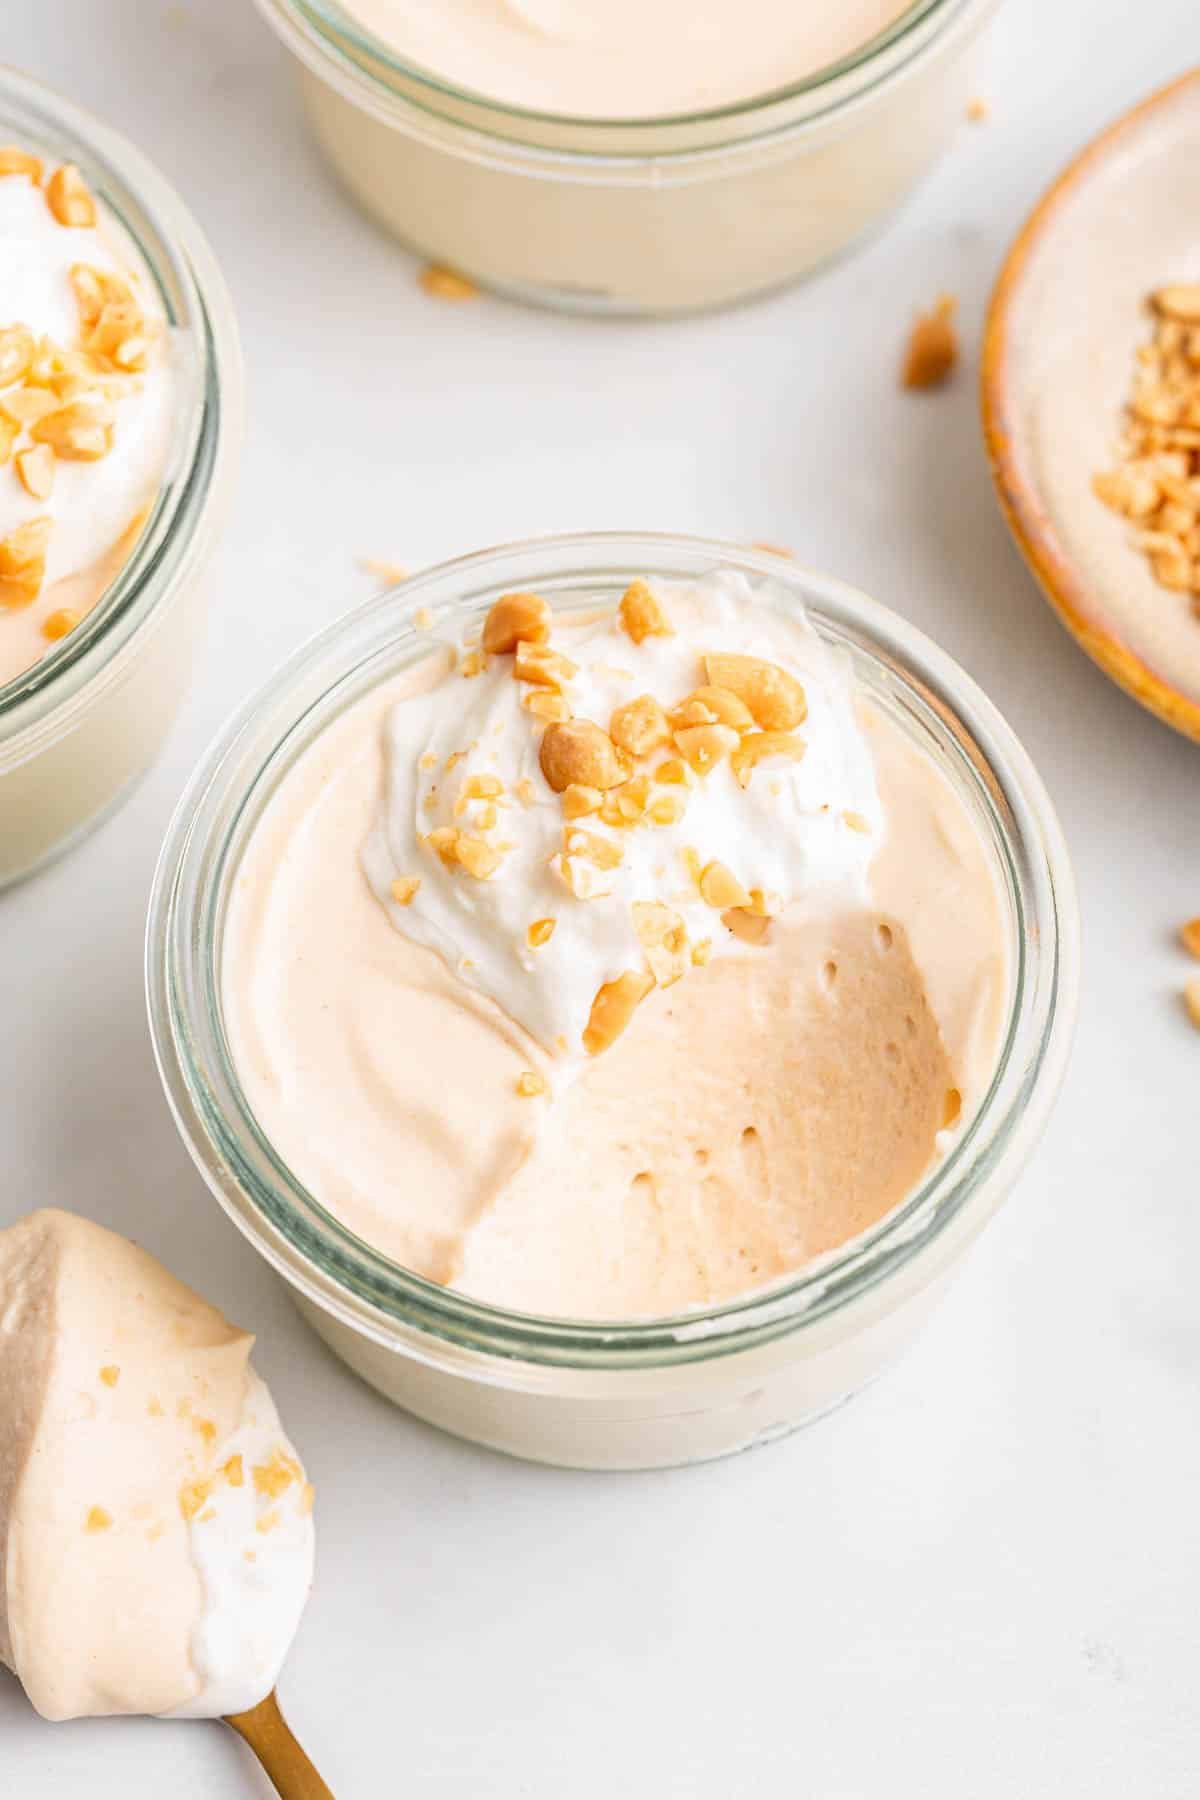 Small bowl of peanut butter mousse with one bite missing to show interior texture.